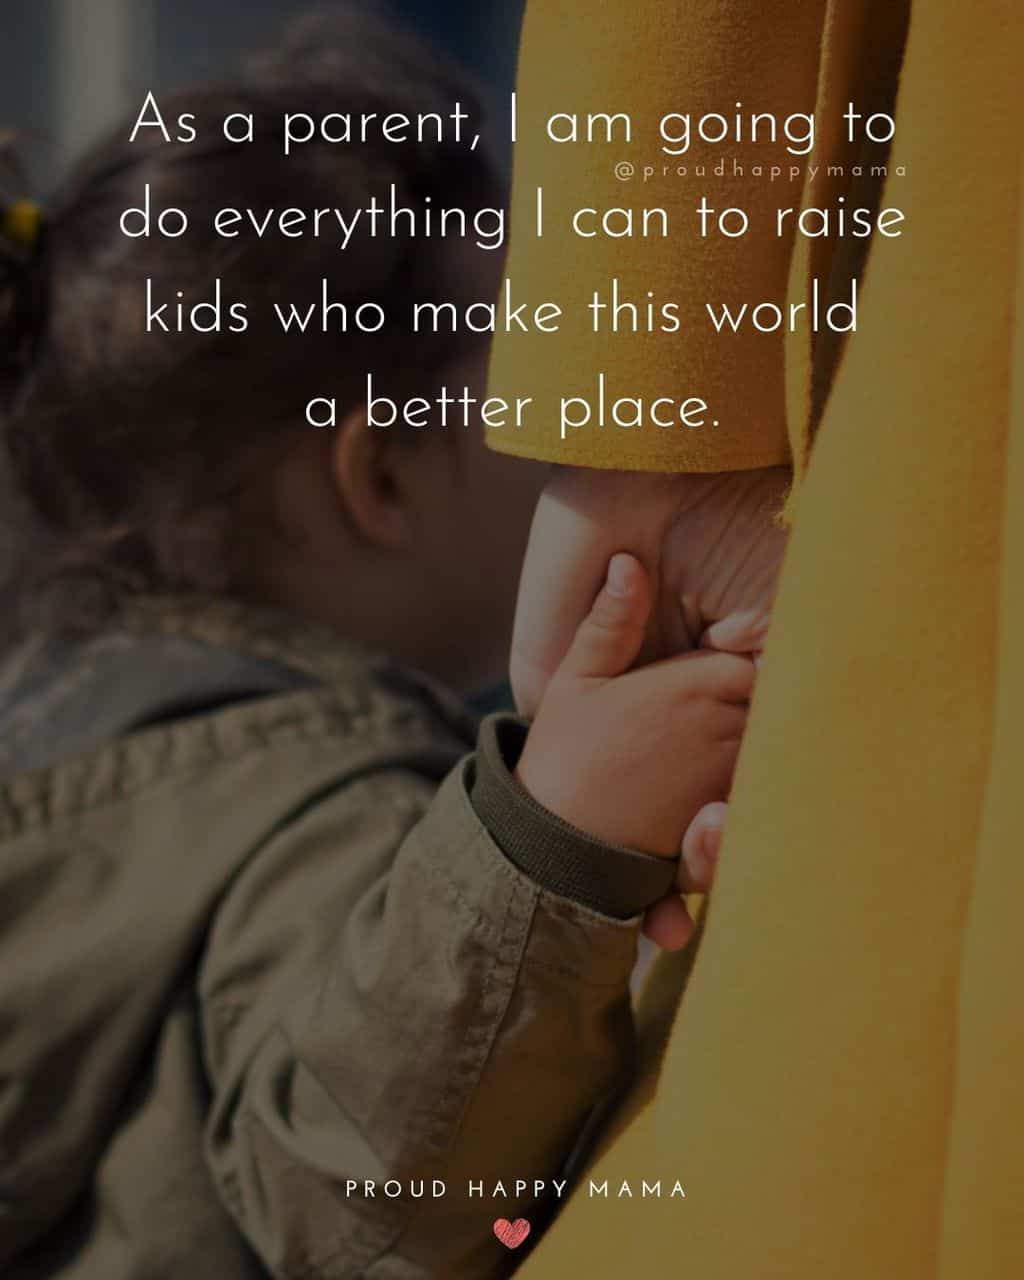 Parenting Quotes - As a parent, I am going to do everything I can to raise kids who make this world a better place.’